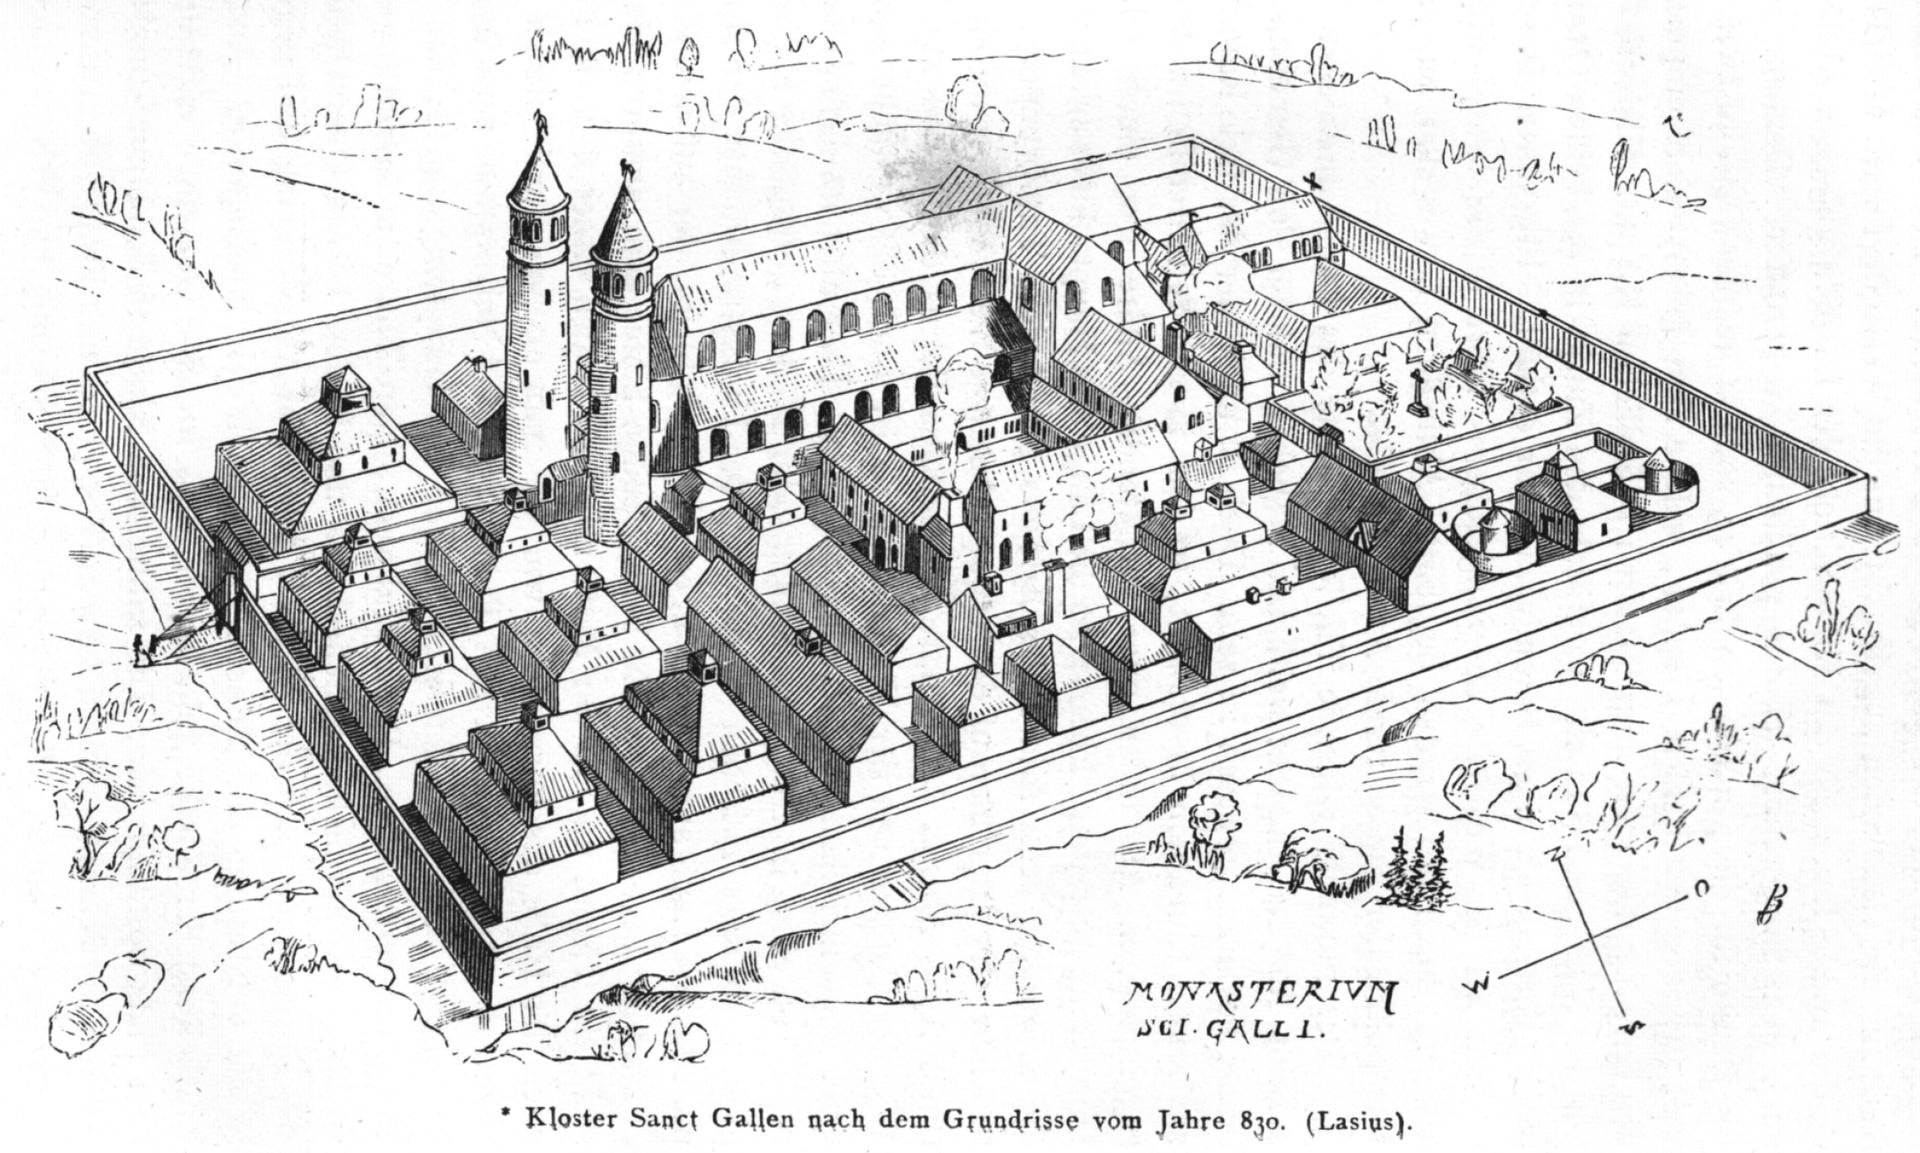 A sketch of a Benedictine cloister being replicated at Campus Galli.